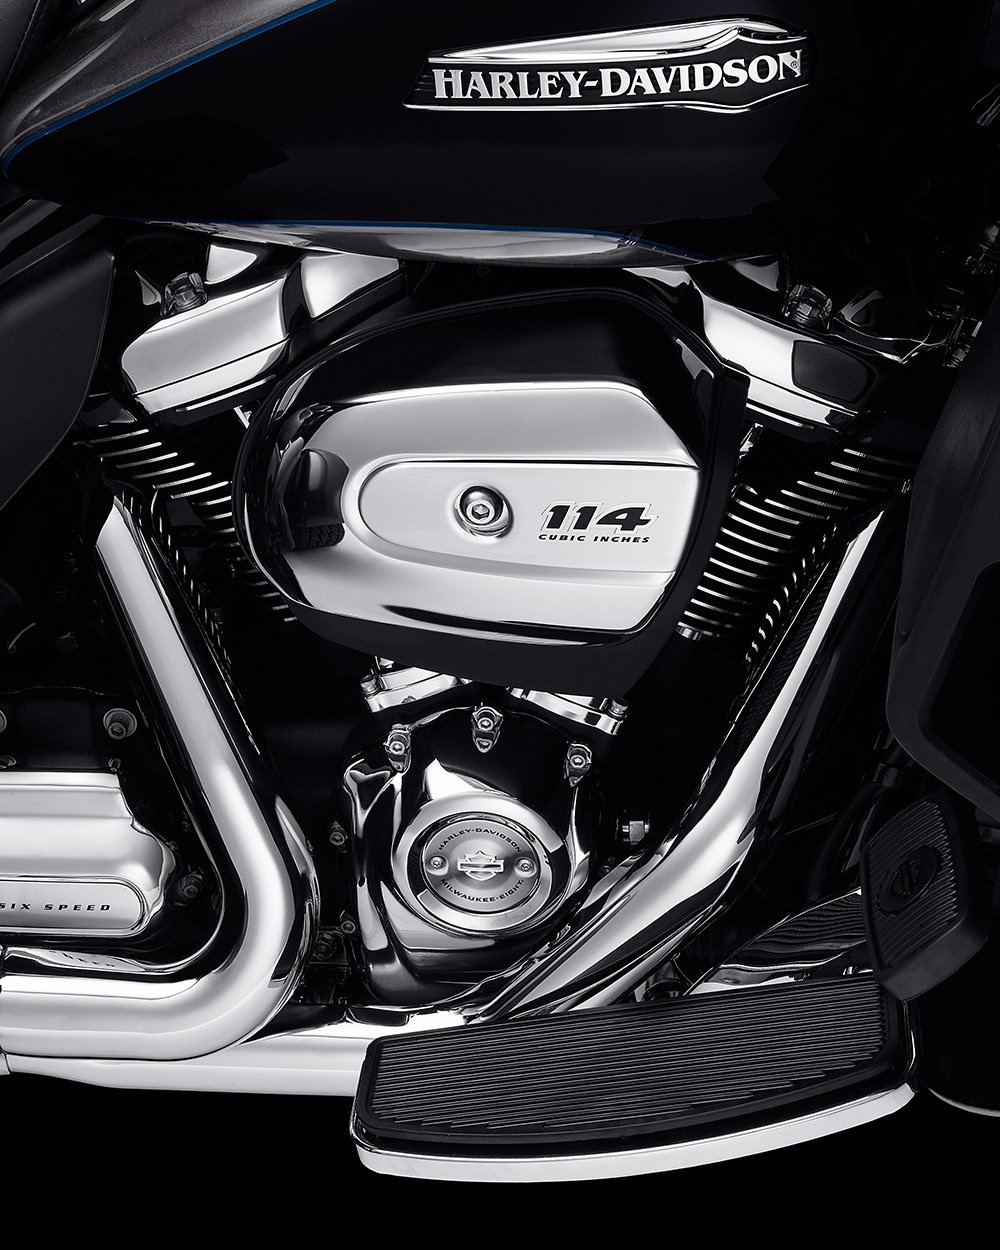 Moteur Twin-Cooled Milwaukee-Eight 114 sur une motocyclette Tri Glide Ultra 2022